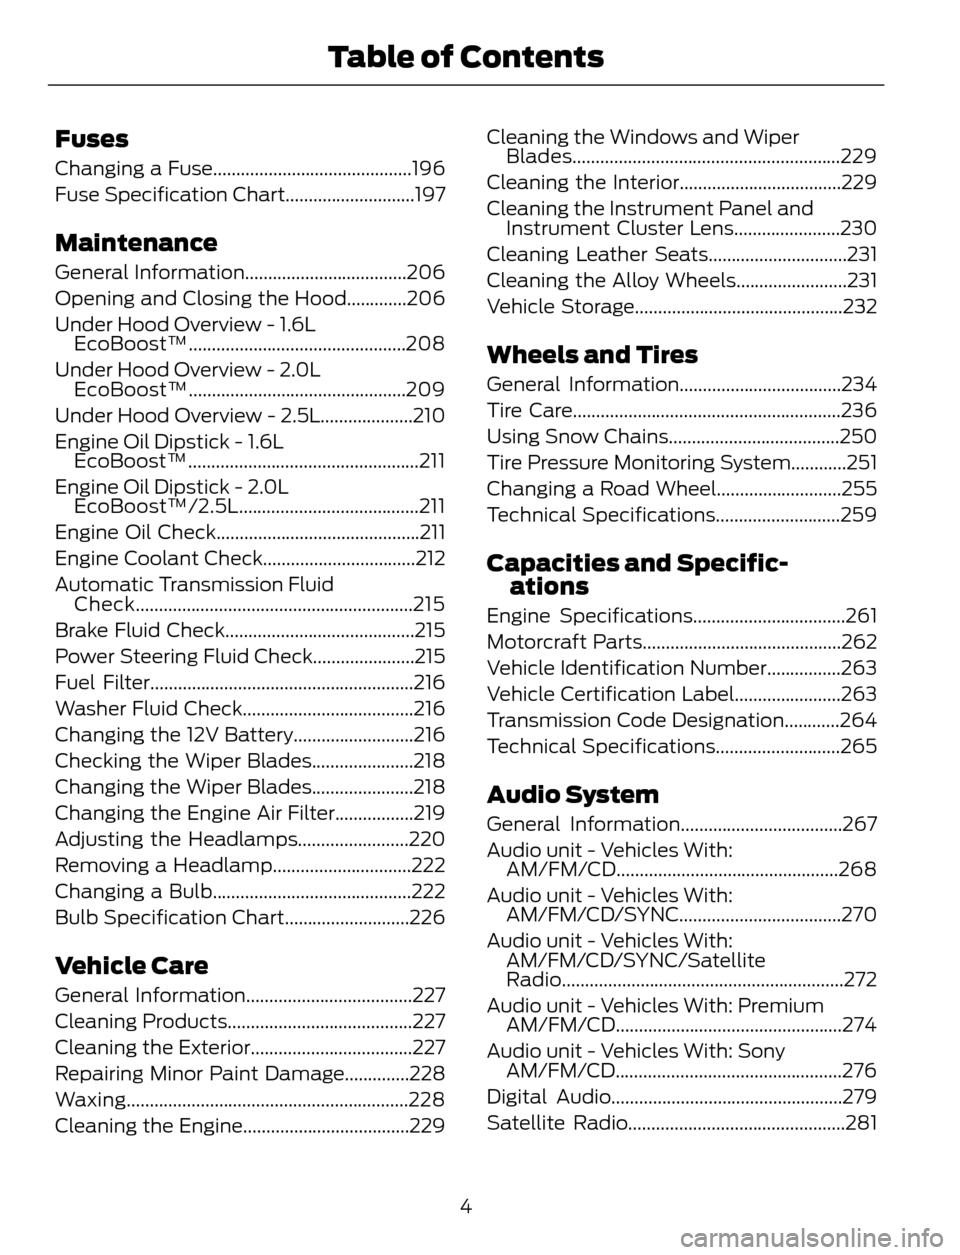 FORD ESCAPE 2014 3.G Owners Manual Fuses
Changing a Fuse...........................................196
Fuse Specification Chart............................197
Maintenance
General Information...................................206
Openin